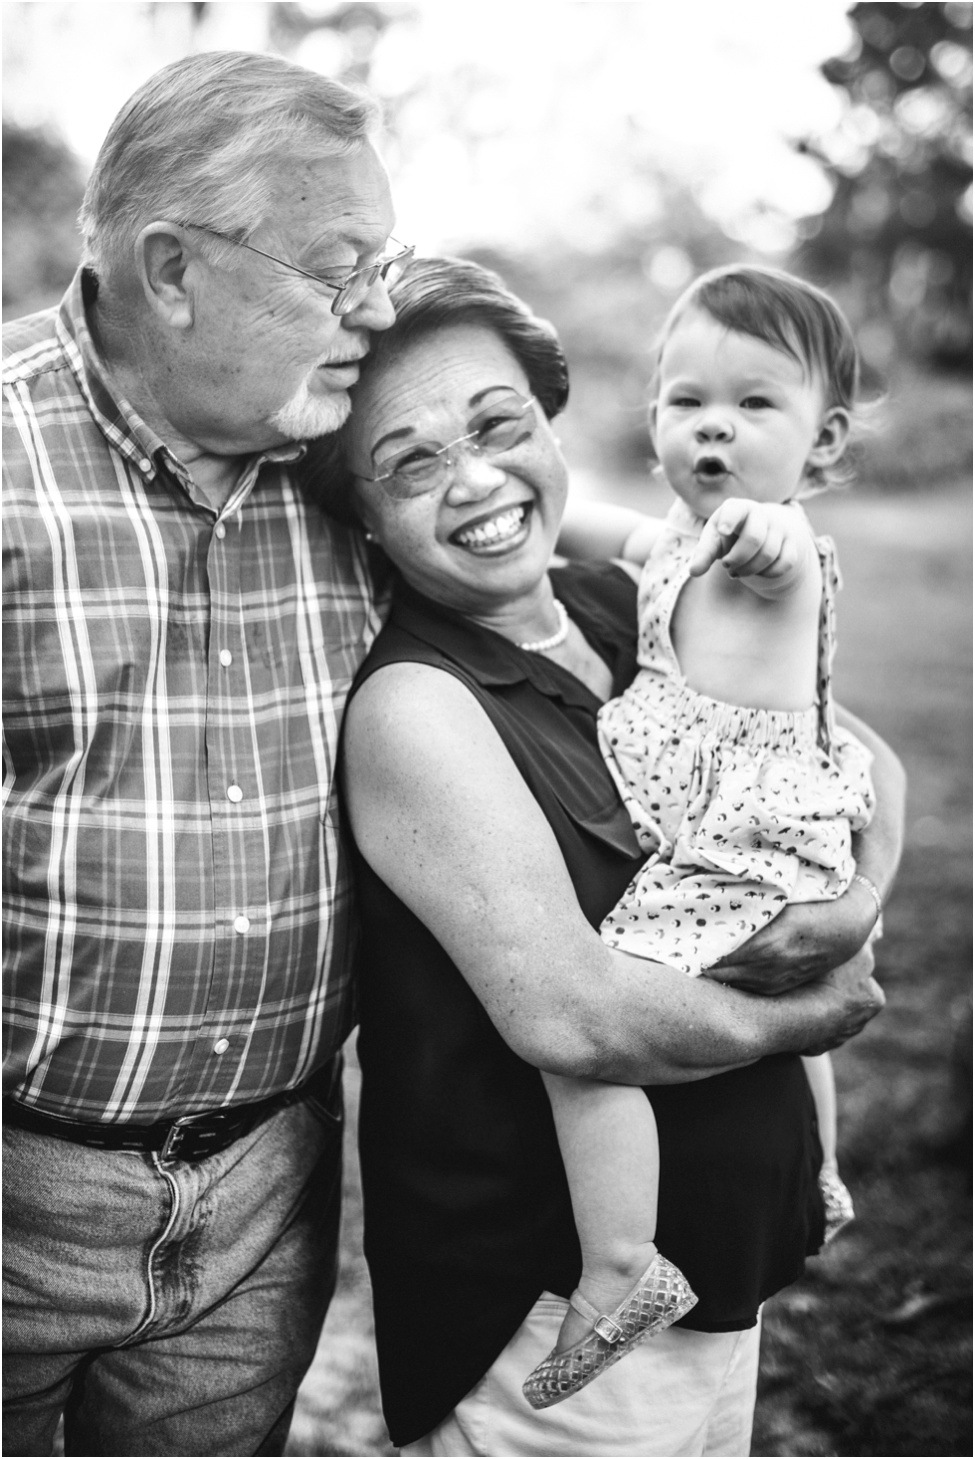 Jacksonville family photographer. Grandparents session in the park. Children photographer in North East Florida. Baby girl with her grandma and grandpa. Kids photographer Jacksonville Florida. Family session Jacksonville Beach, Ponte Vedra, St. Augustine